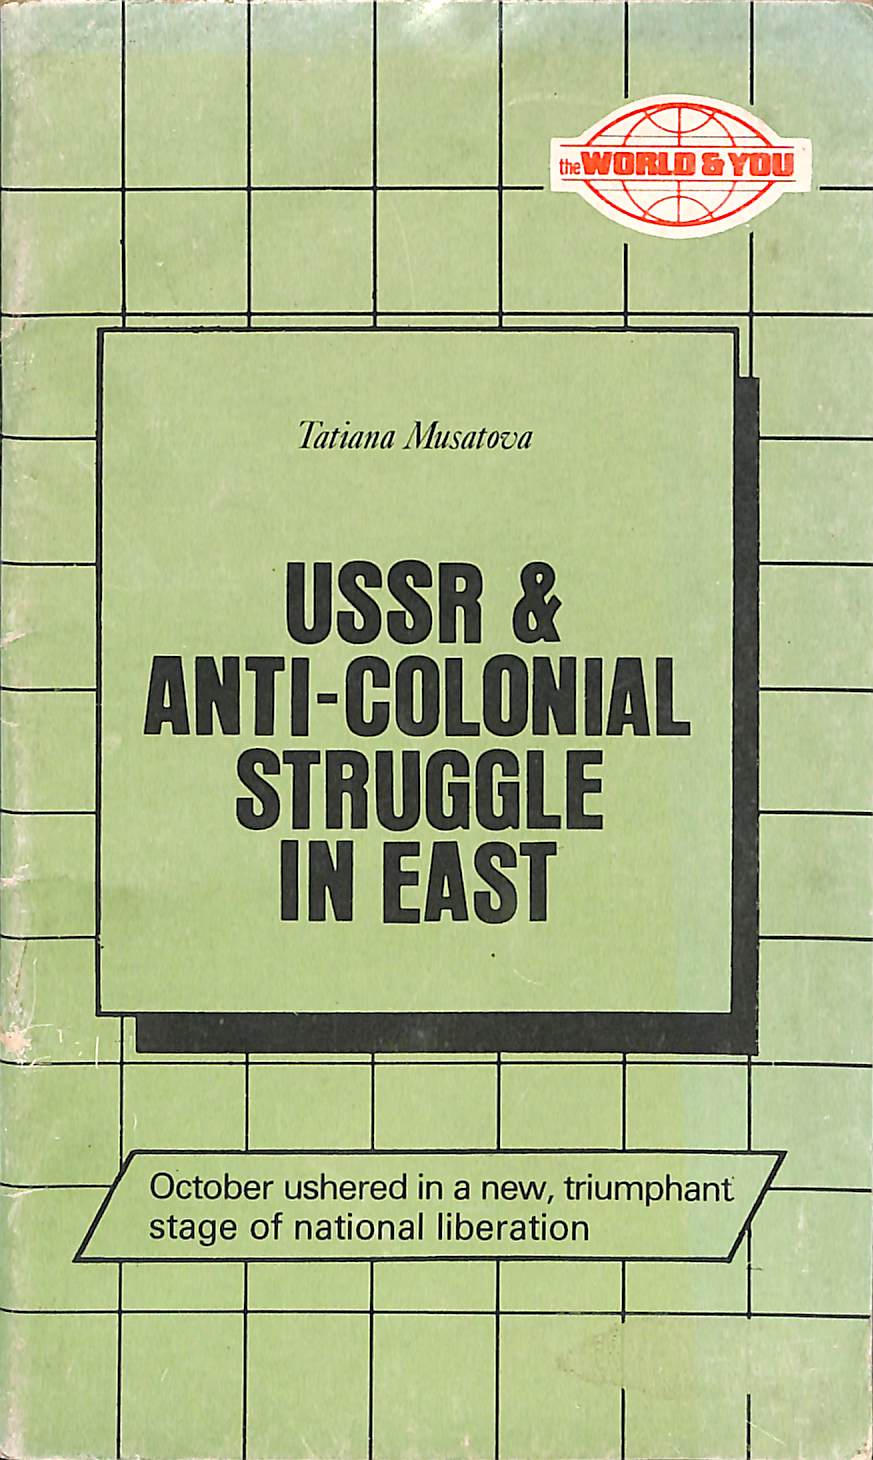 USSR & anti-colonial atruggle in east